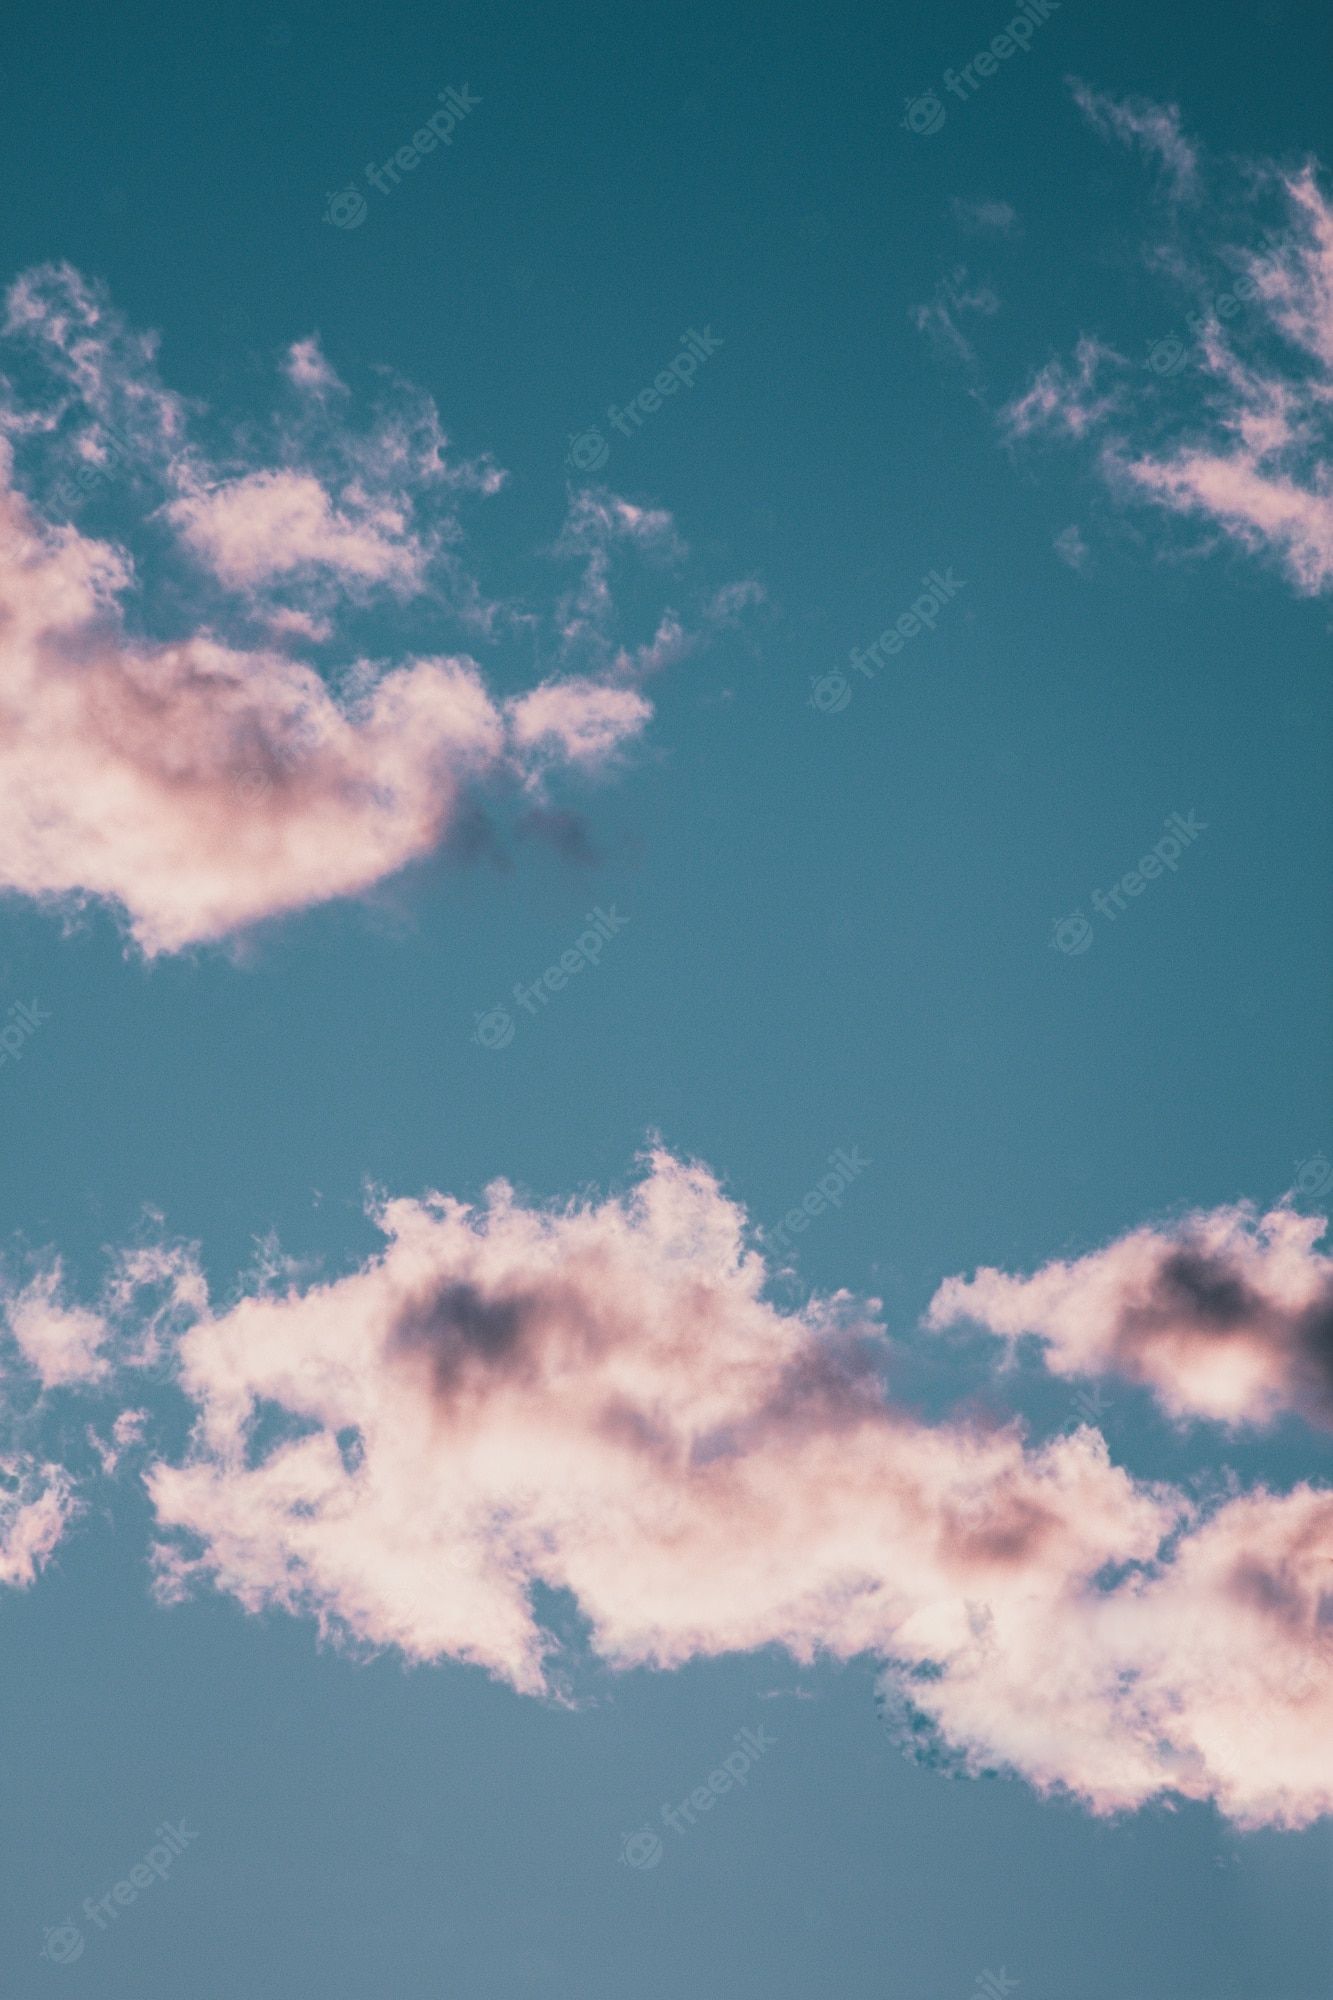 Background Aesthetic Clouds Image